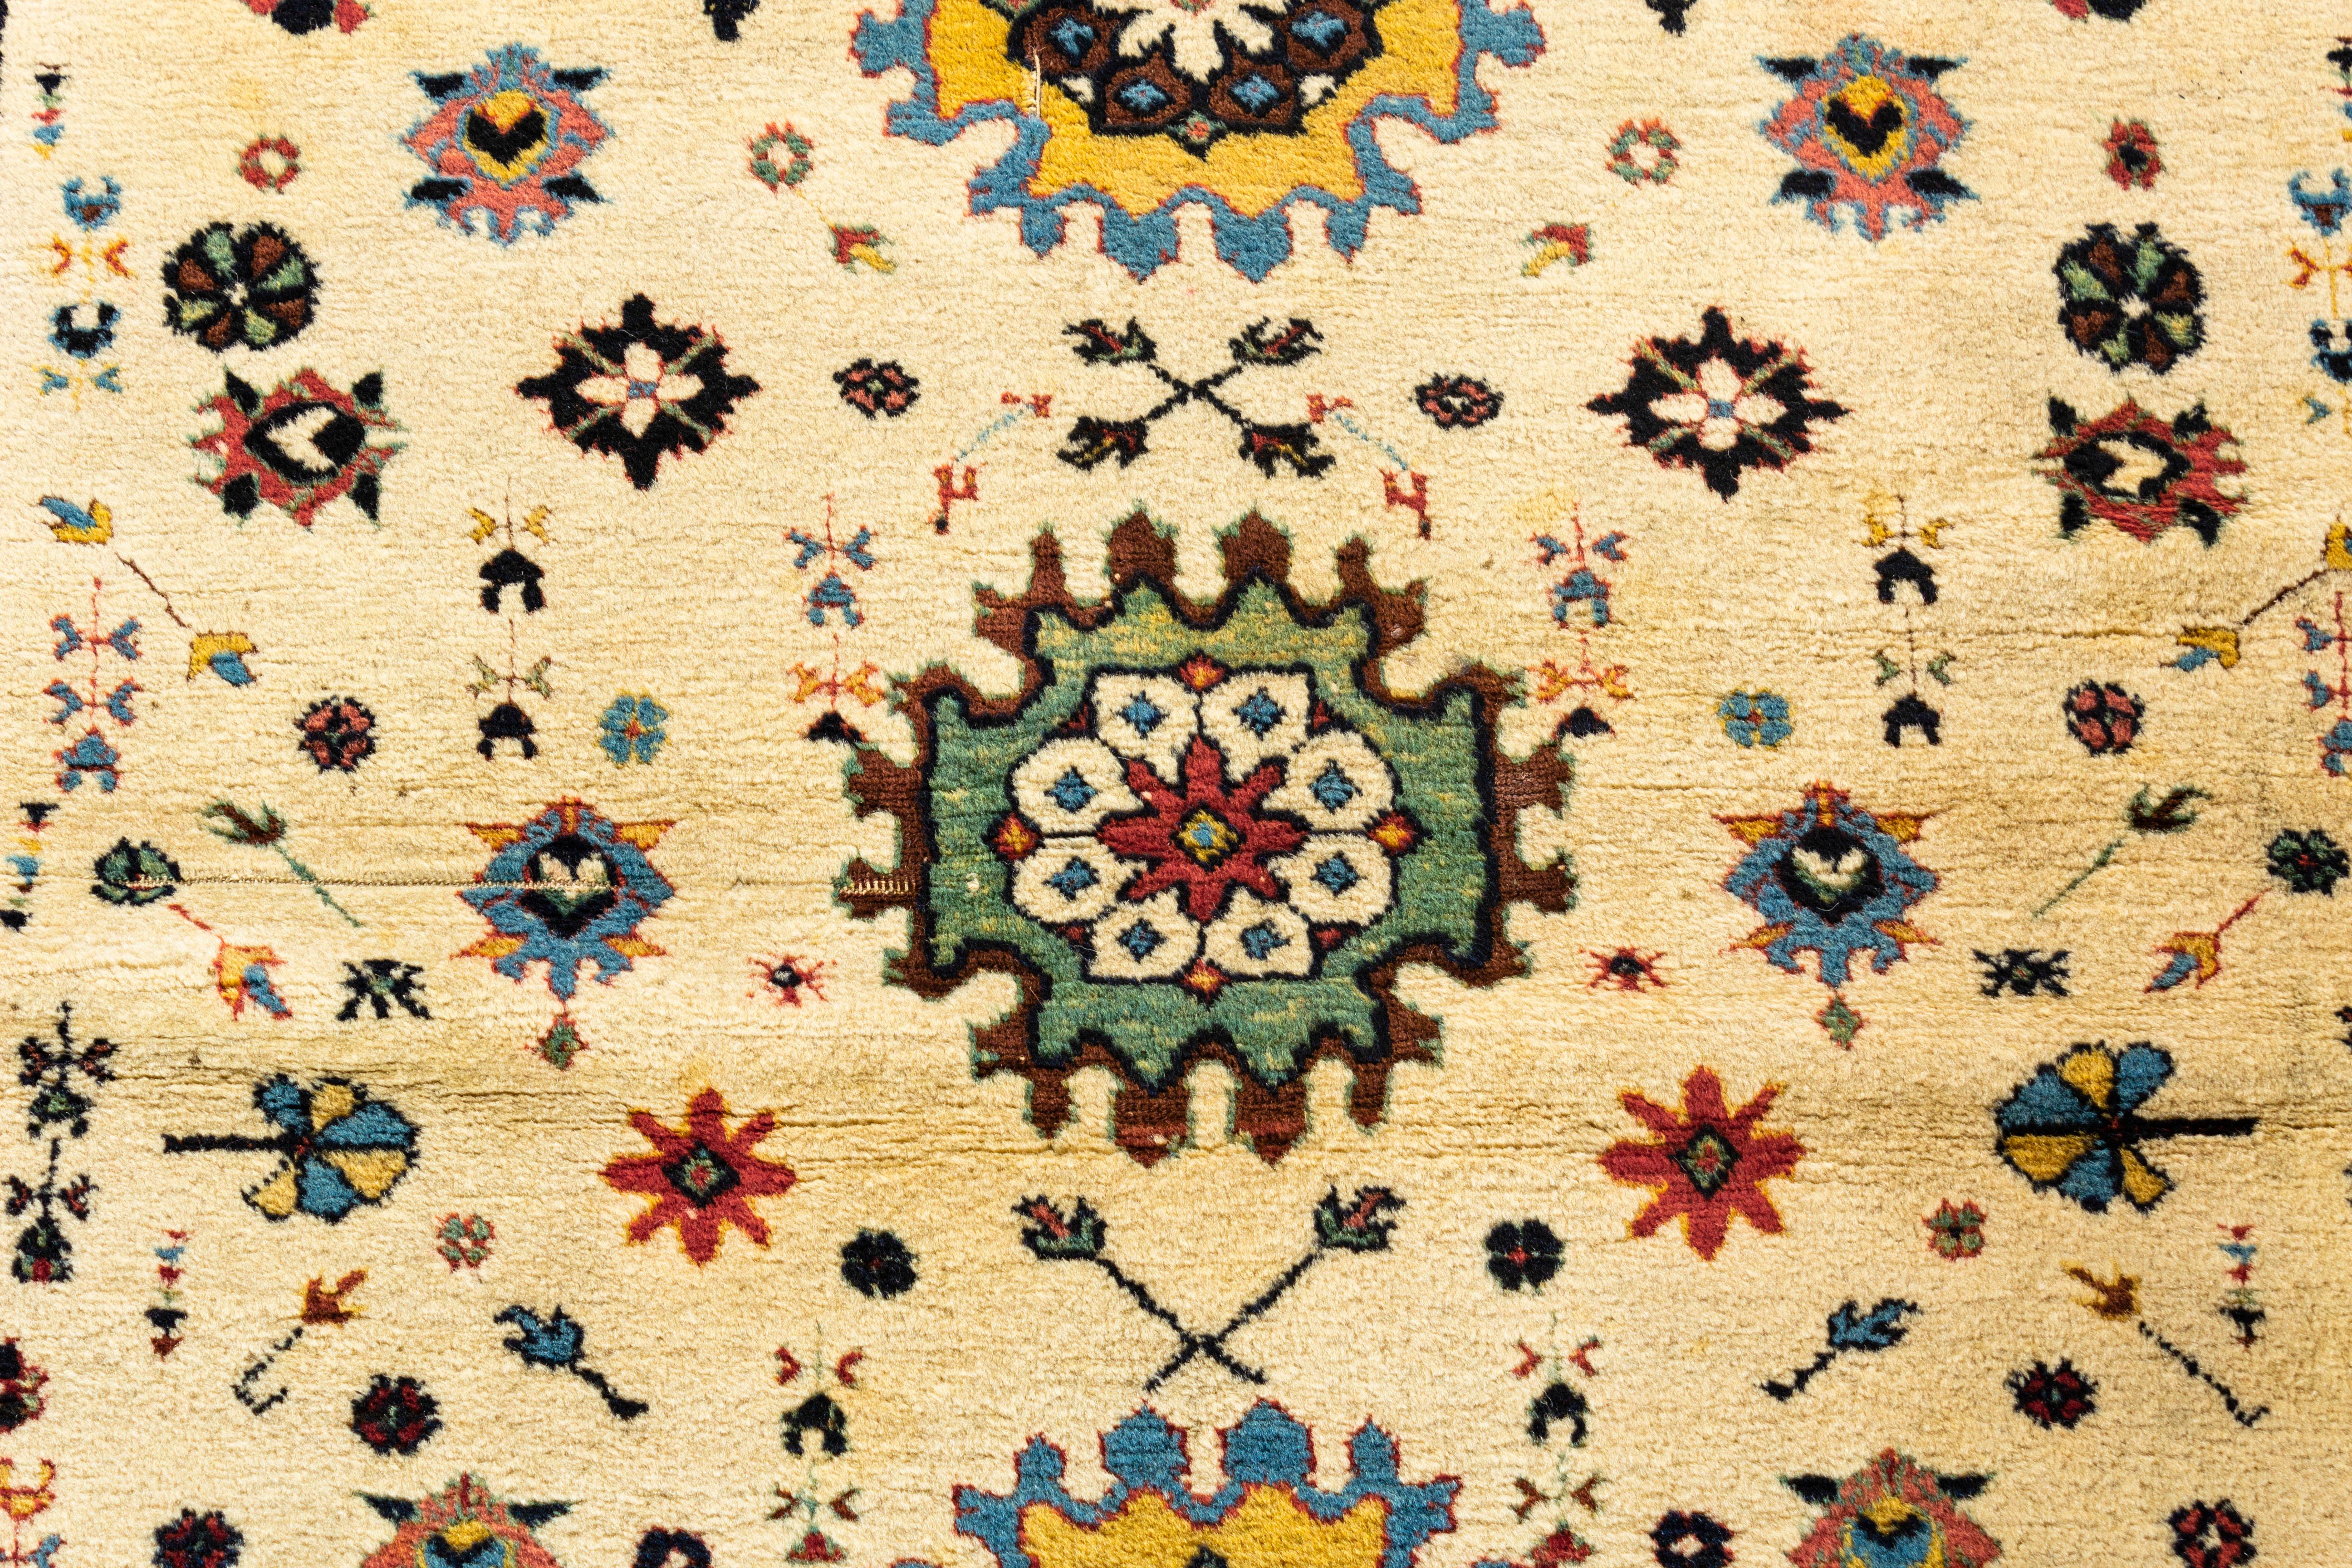 Vintage Caucasian rug, circa 1920. These types of antique Caucasian rugs were woven in the eastern part of the region, mostly along the west coast of the Caspian Sea. They display intricate designs, often in prayer (niche) formats; shorter, often